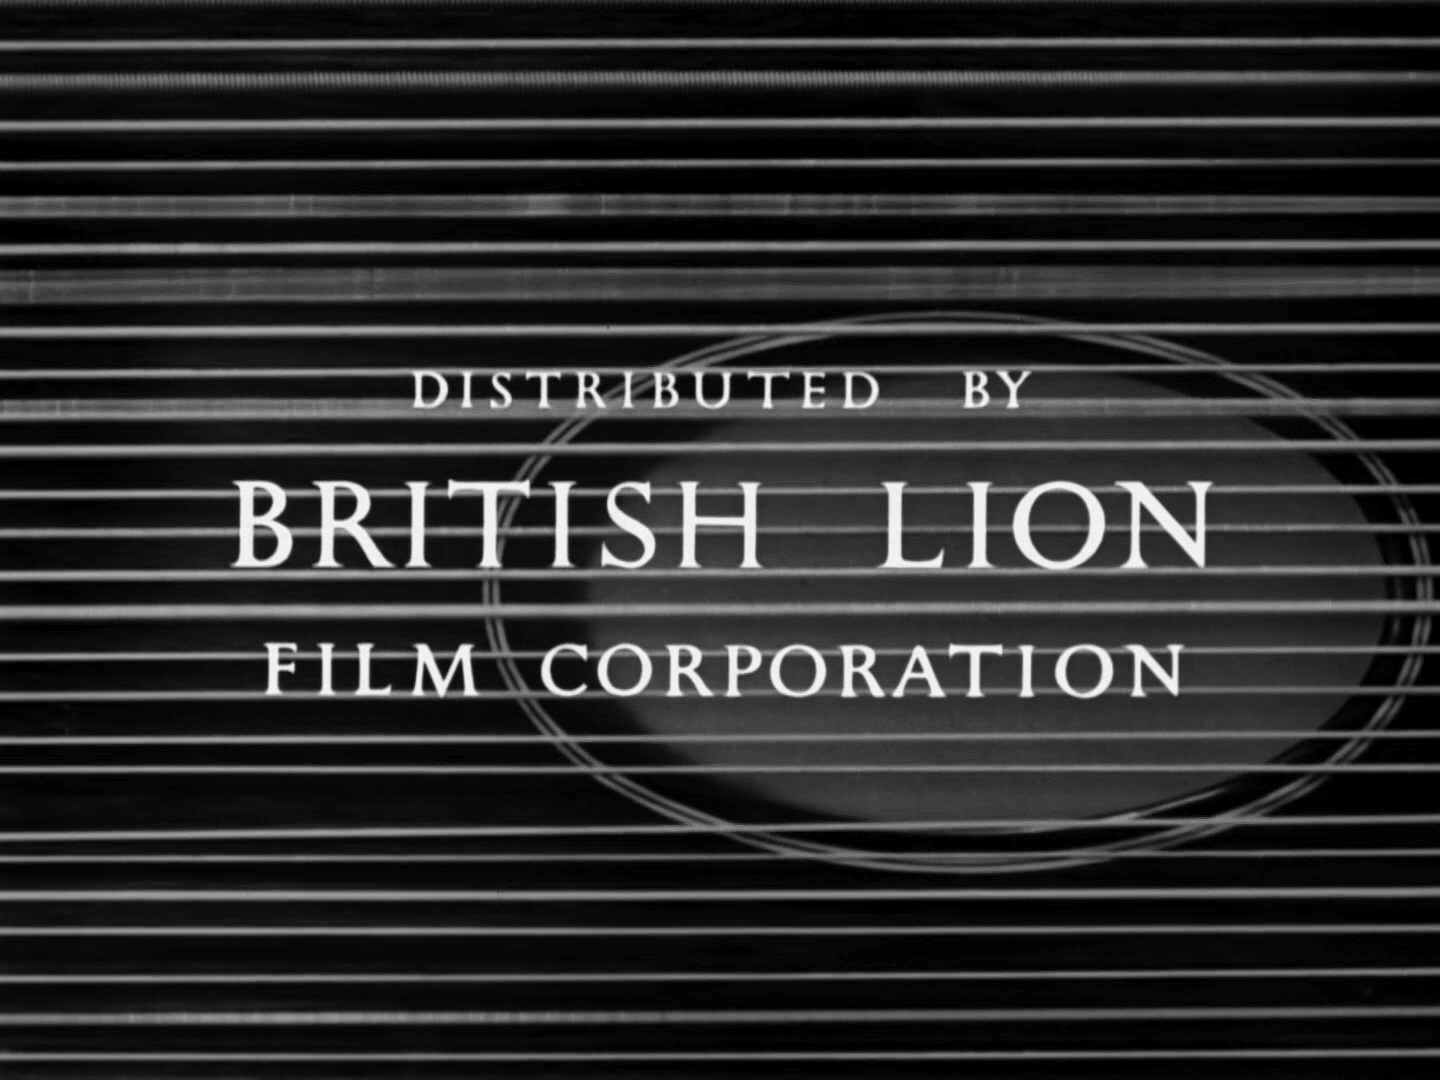 Main title from The Third Man (1949) (11). Distributed by British Lion Film Corporation